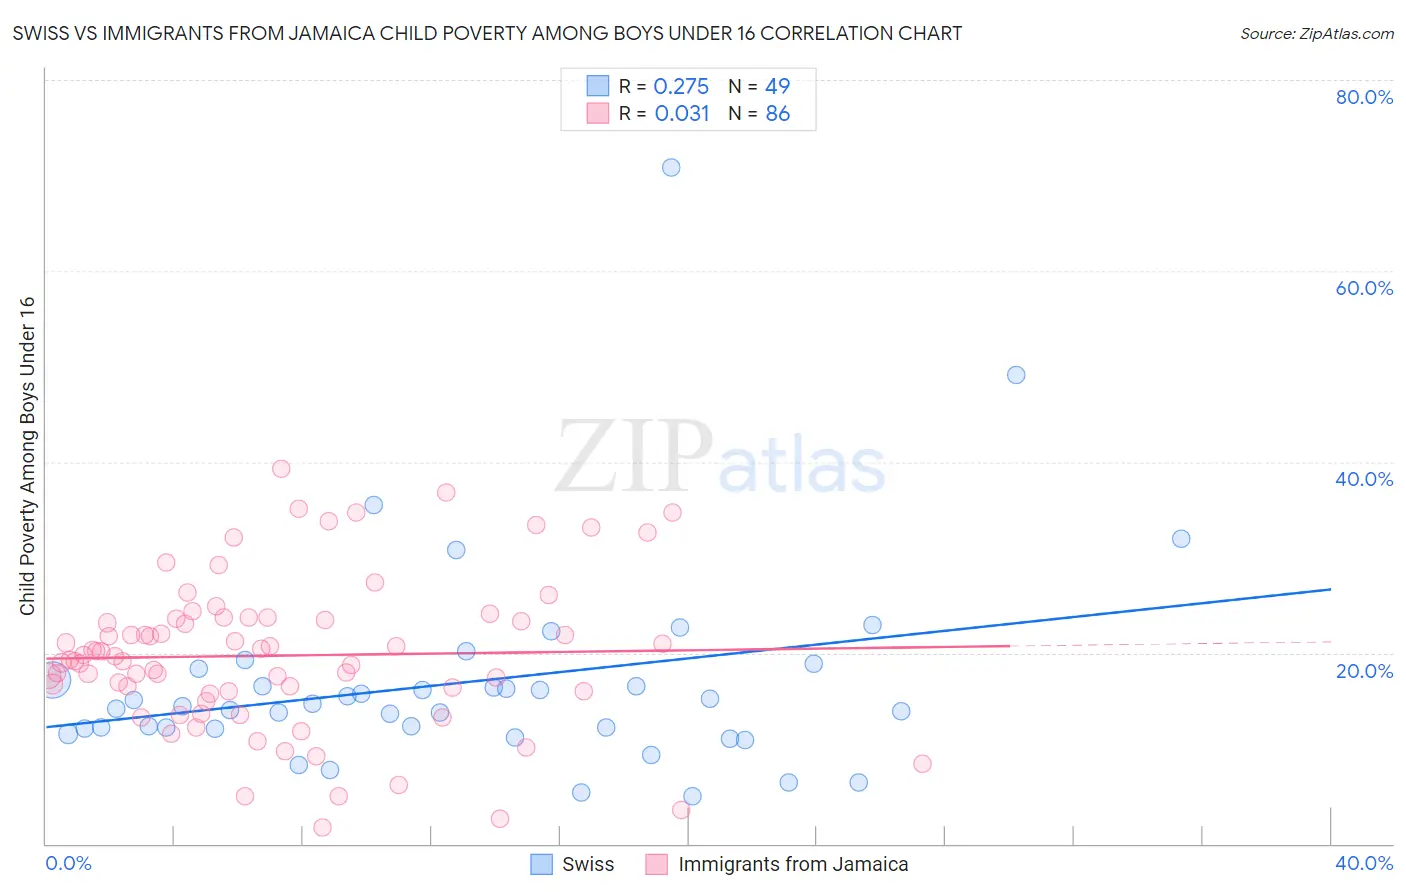 Swiss vs Immigrants from Jamaica Child Poverty Among Boys Under 16